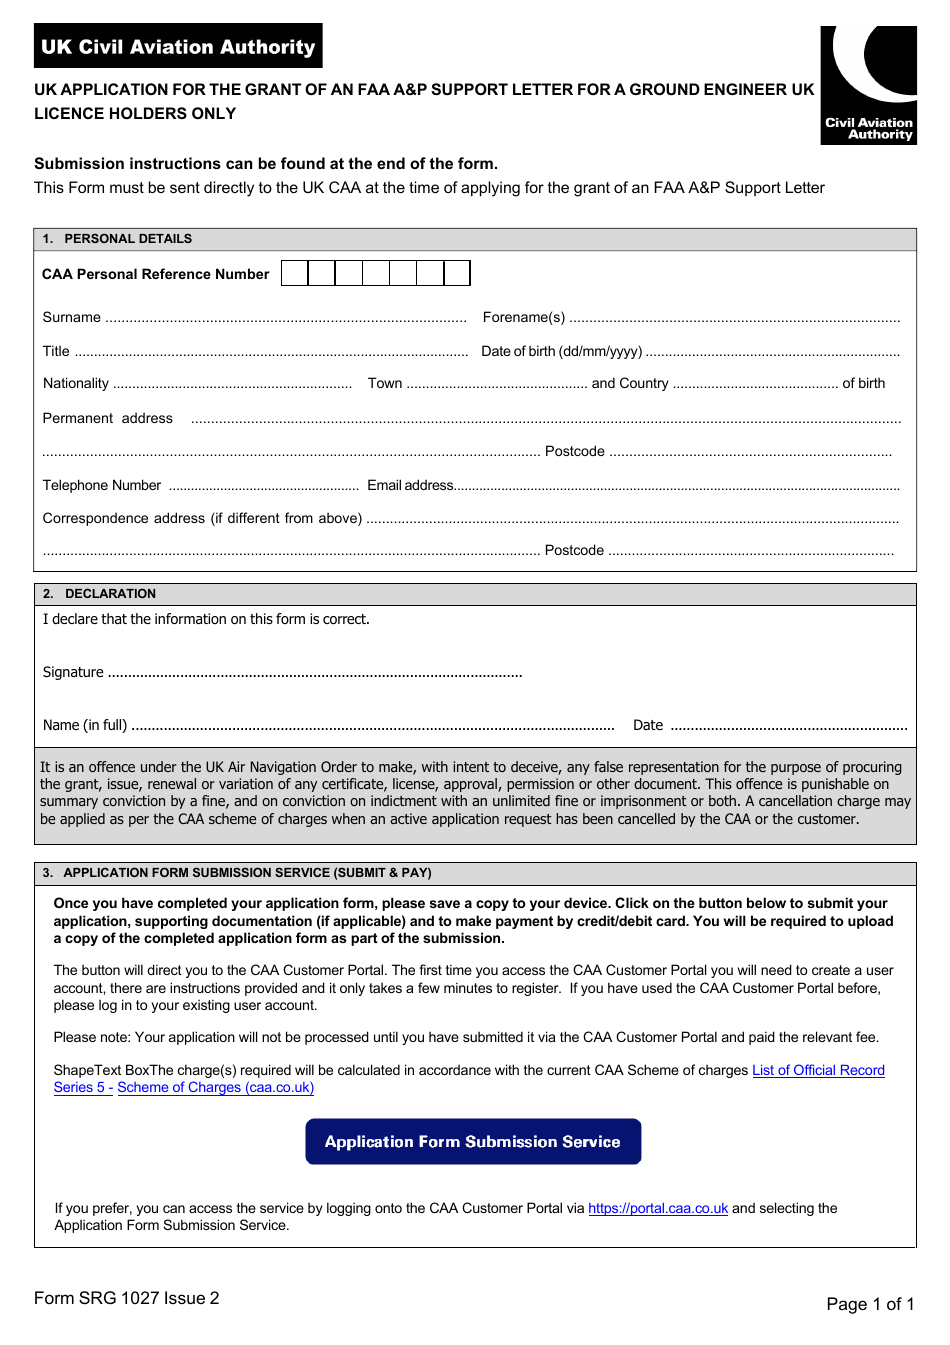 Form SRG1027 UK Application for the Grant of an FAA ap Support Letter for a Ground Engineer UK Licence Holders Only - United Kingdom, Page 1